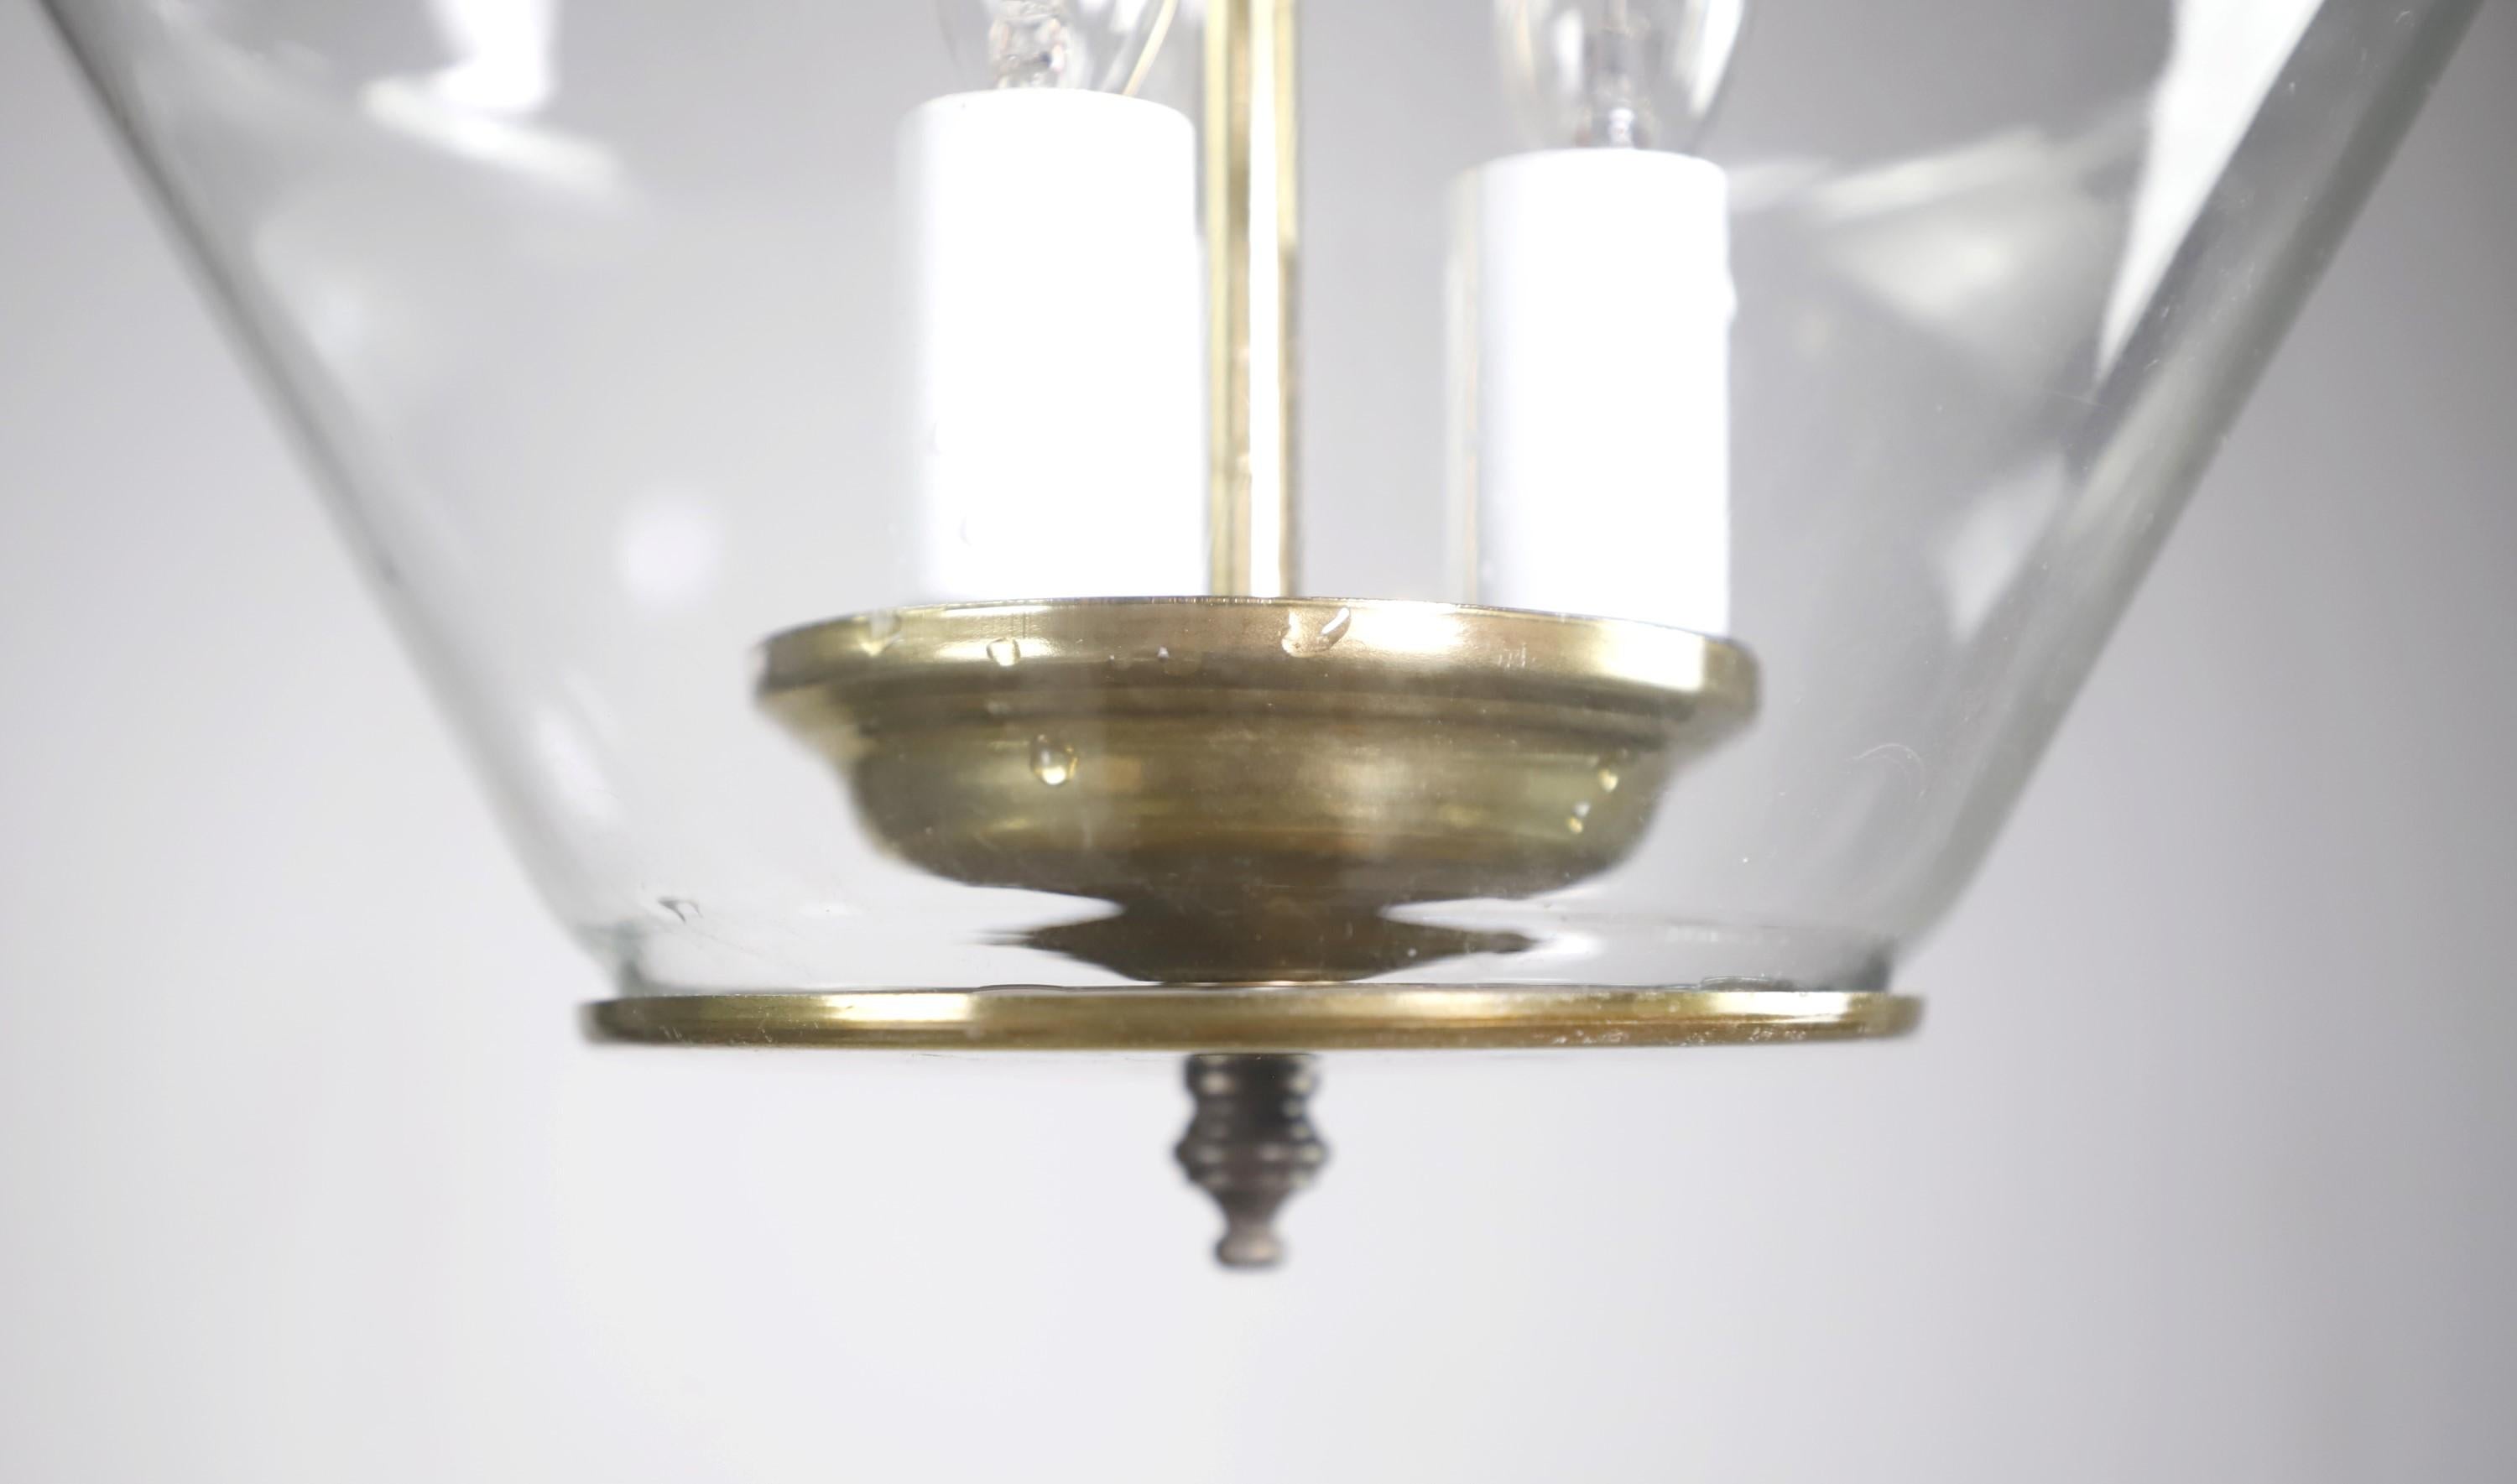 1930s Railroad Brass Lantern Pendant Light 3 Candelabra Sockets In Good Condition For Sale In New York, NY